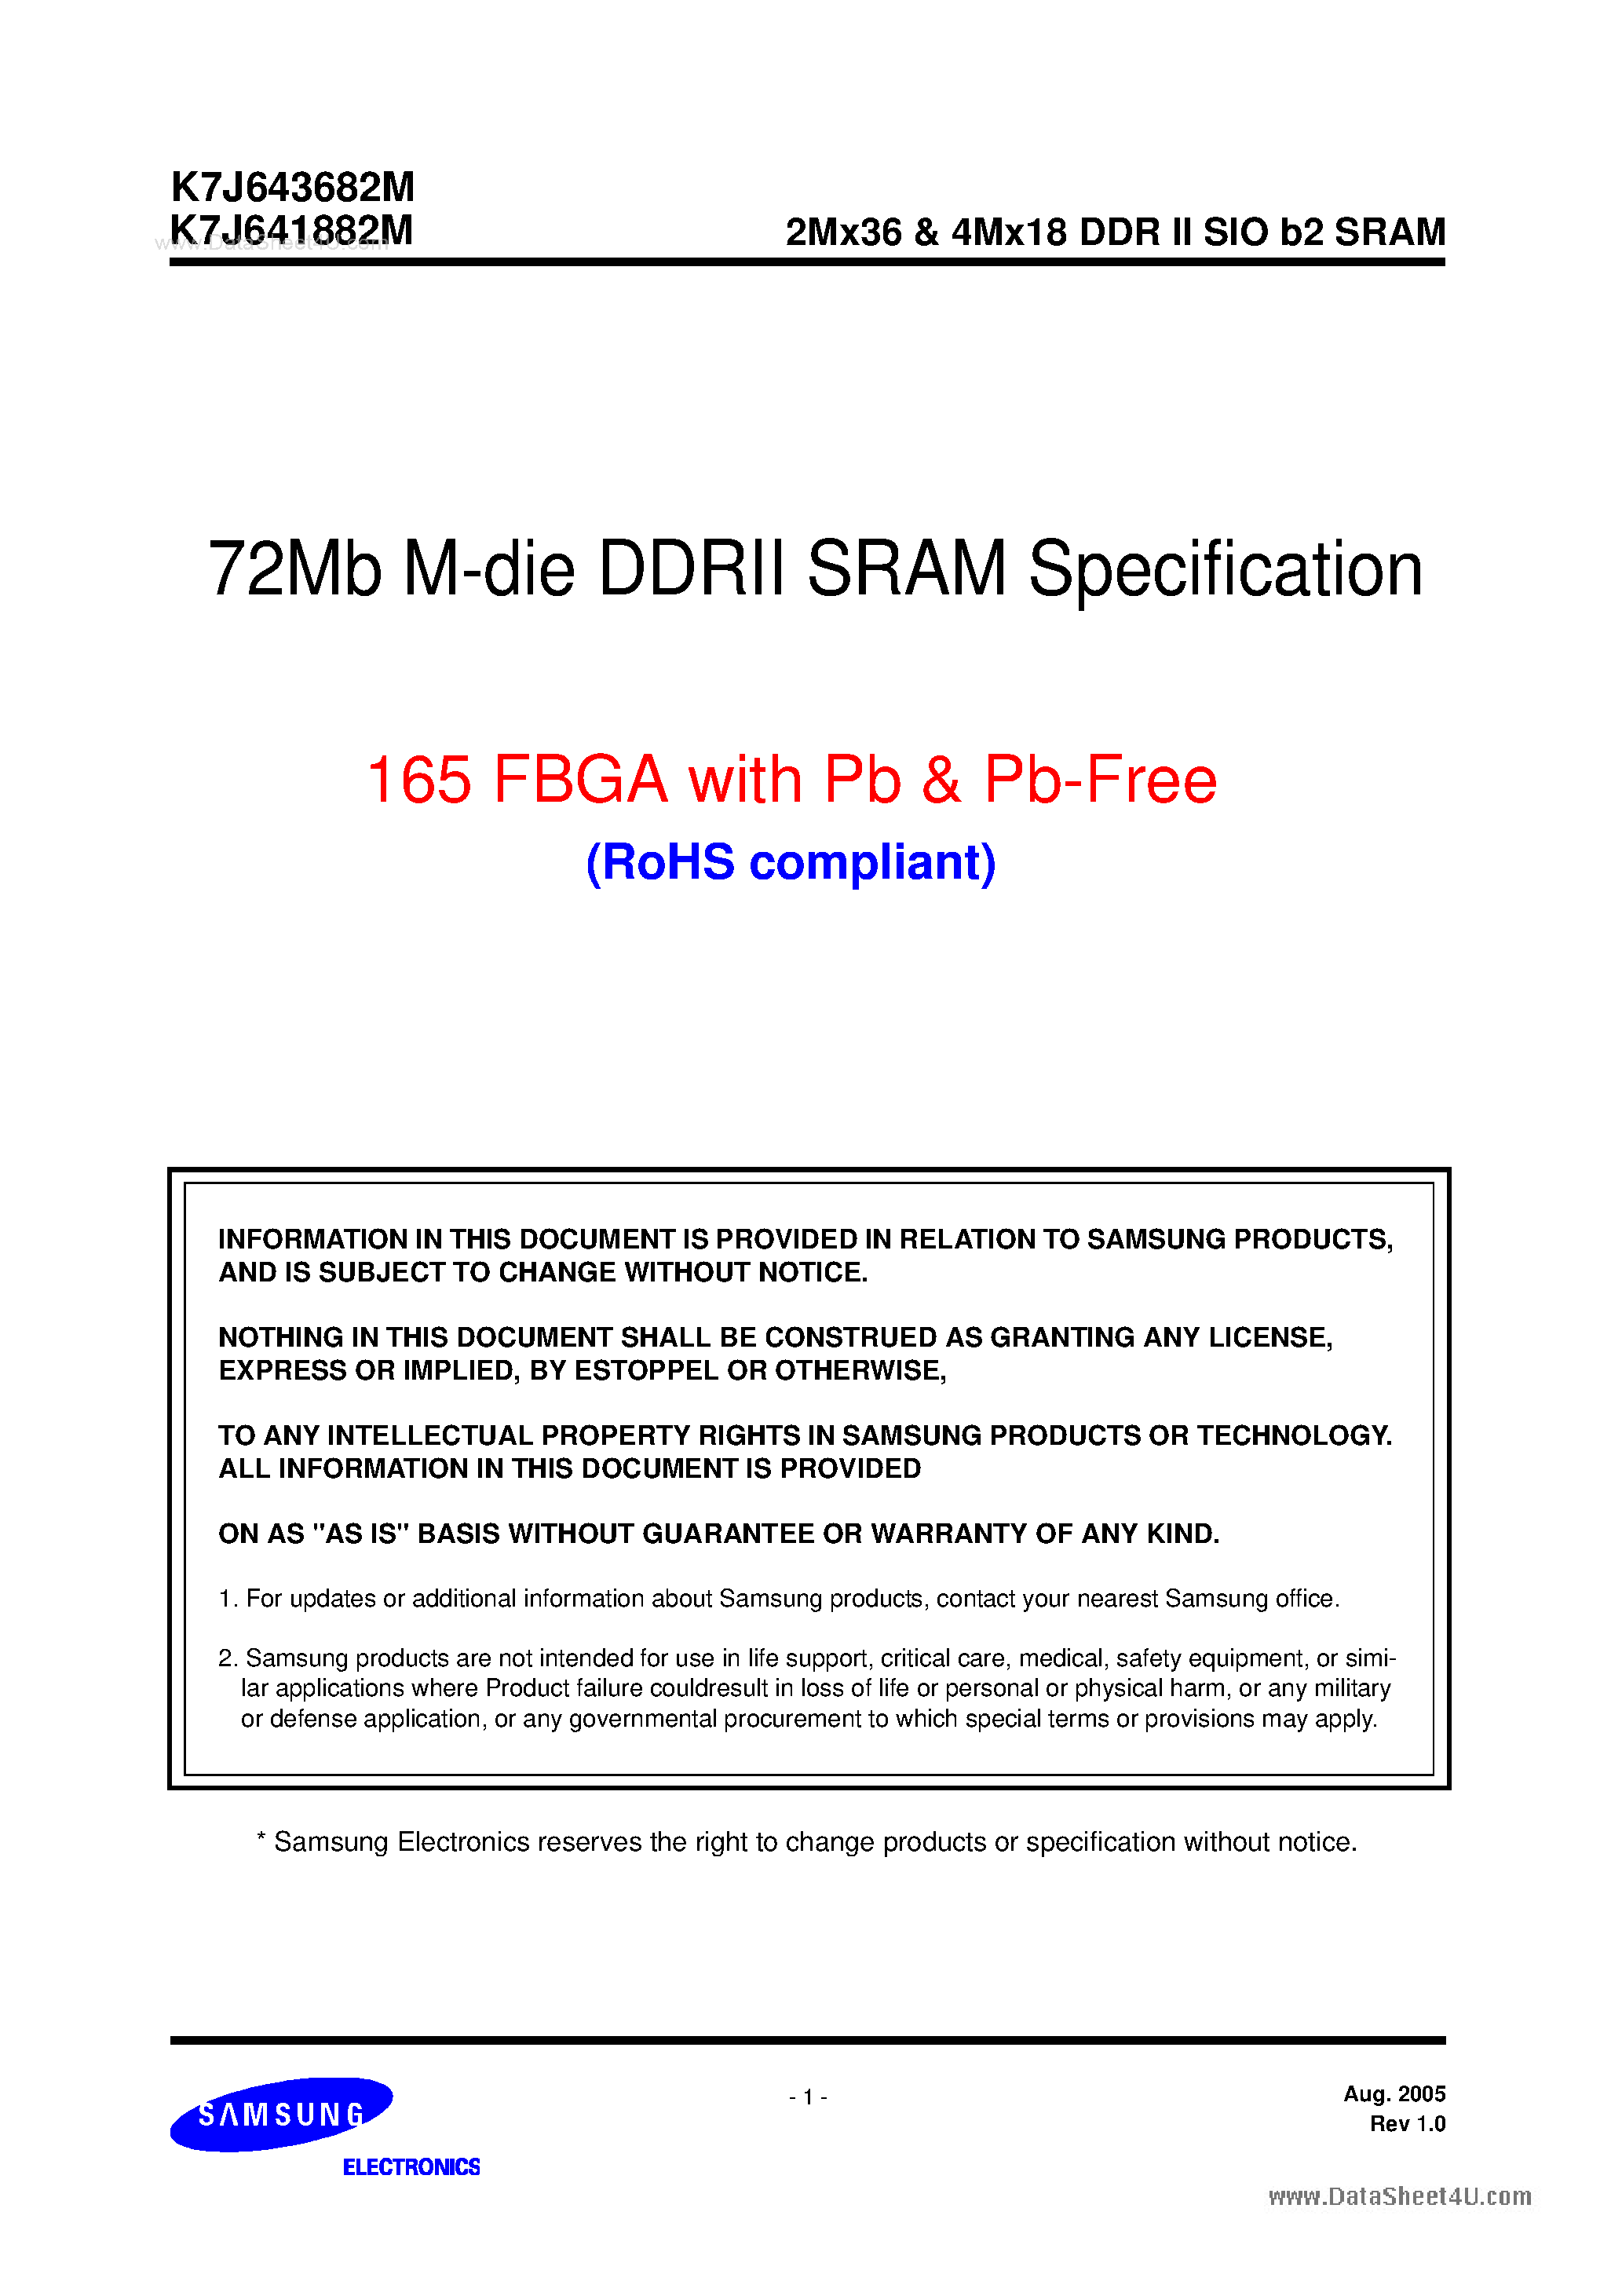 Datasheet K7J641882M - (K7J641882M / K7J643682M) 72Mb M-die DDRII SRAM Specification page 1